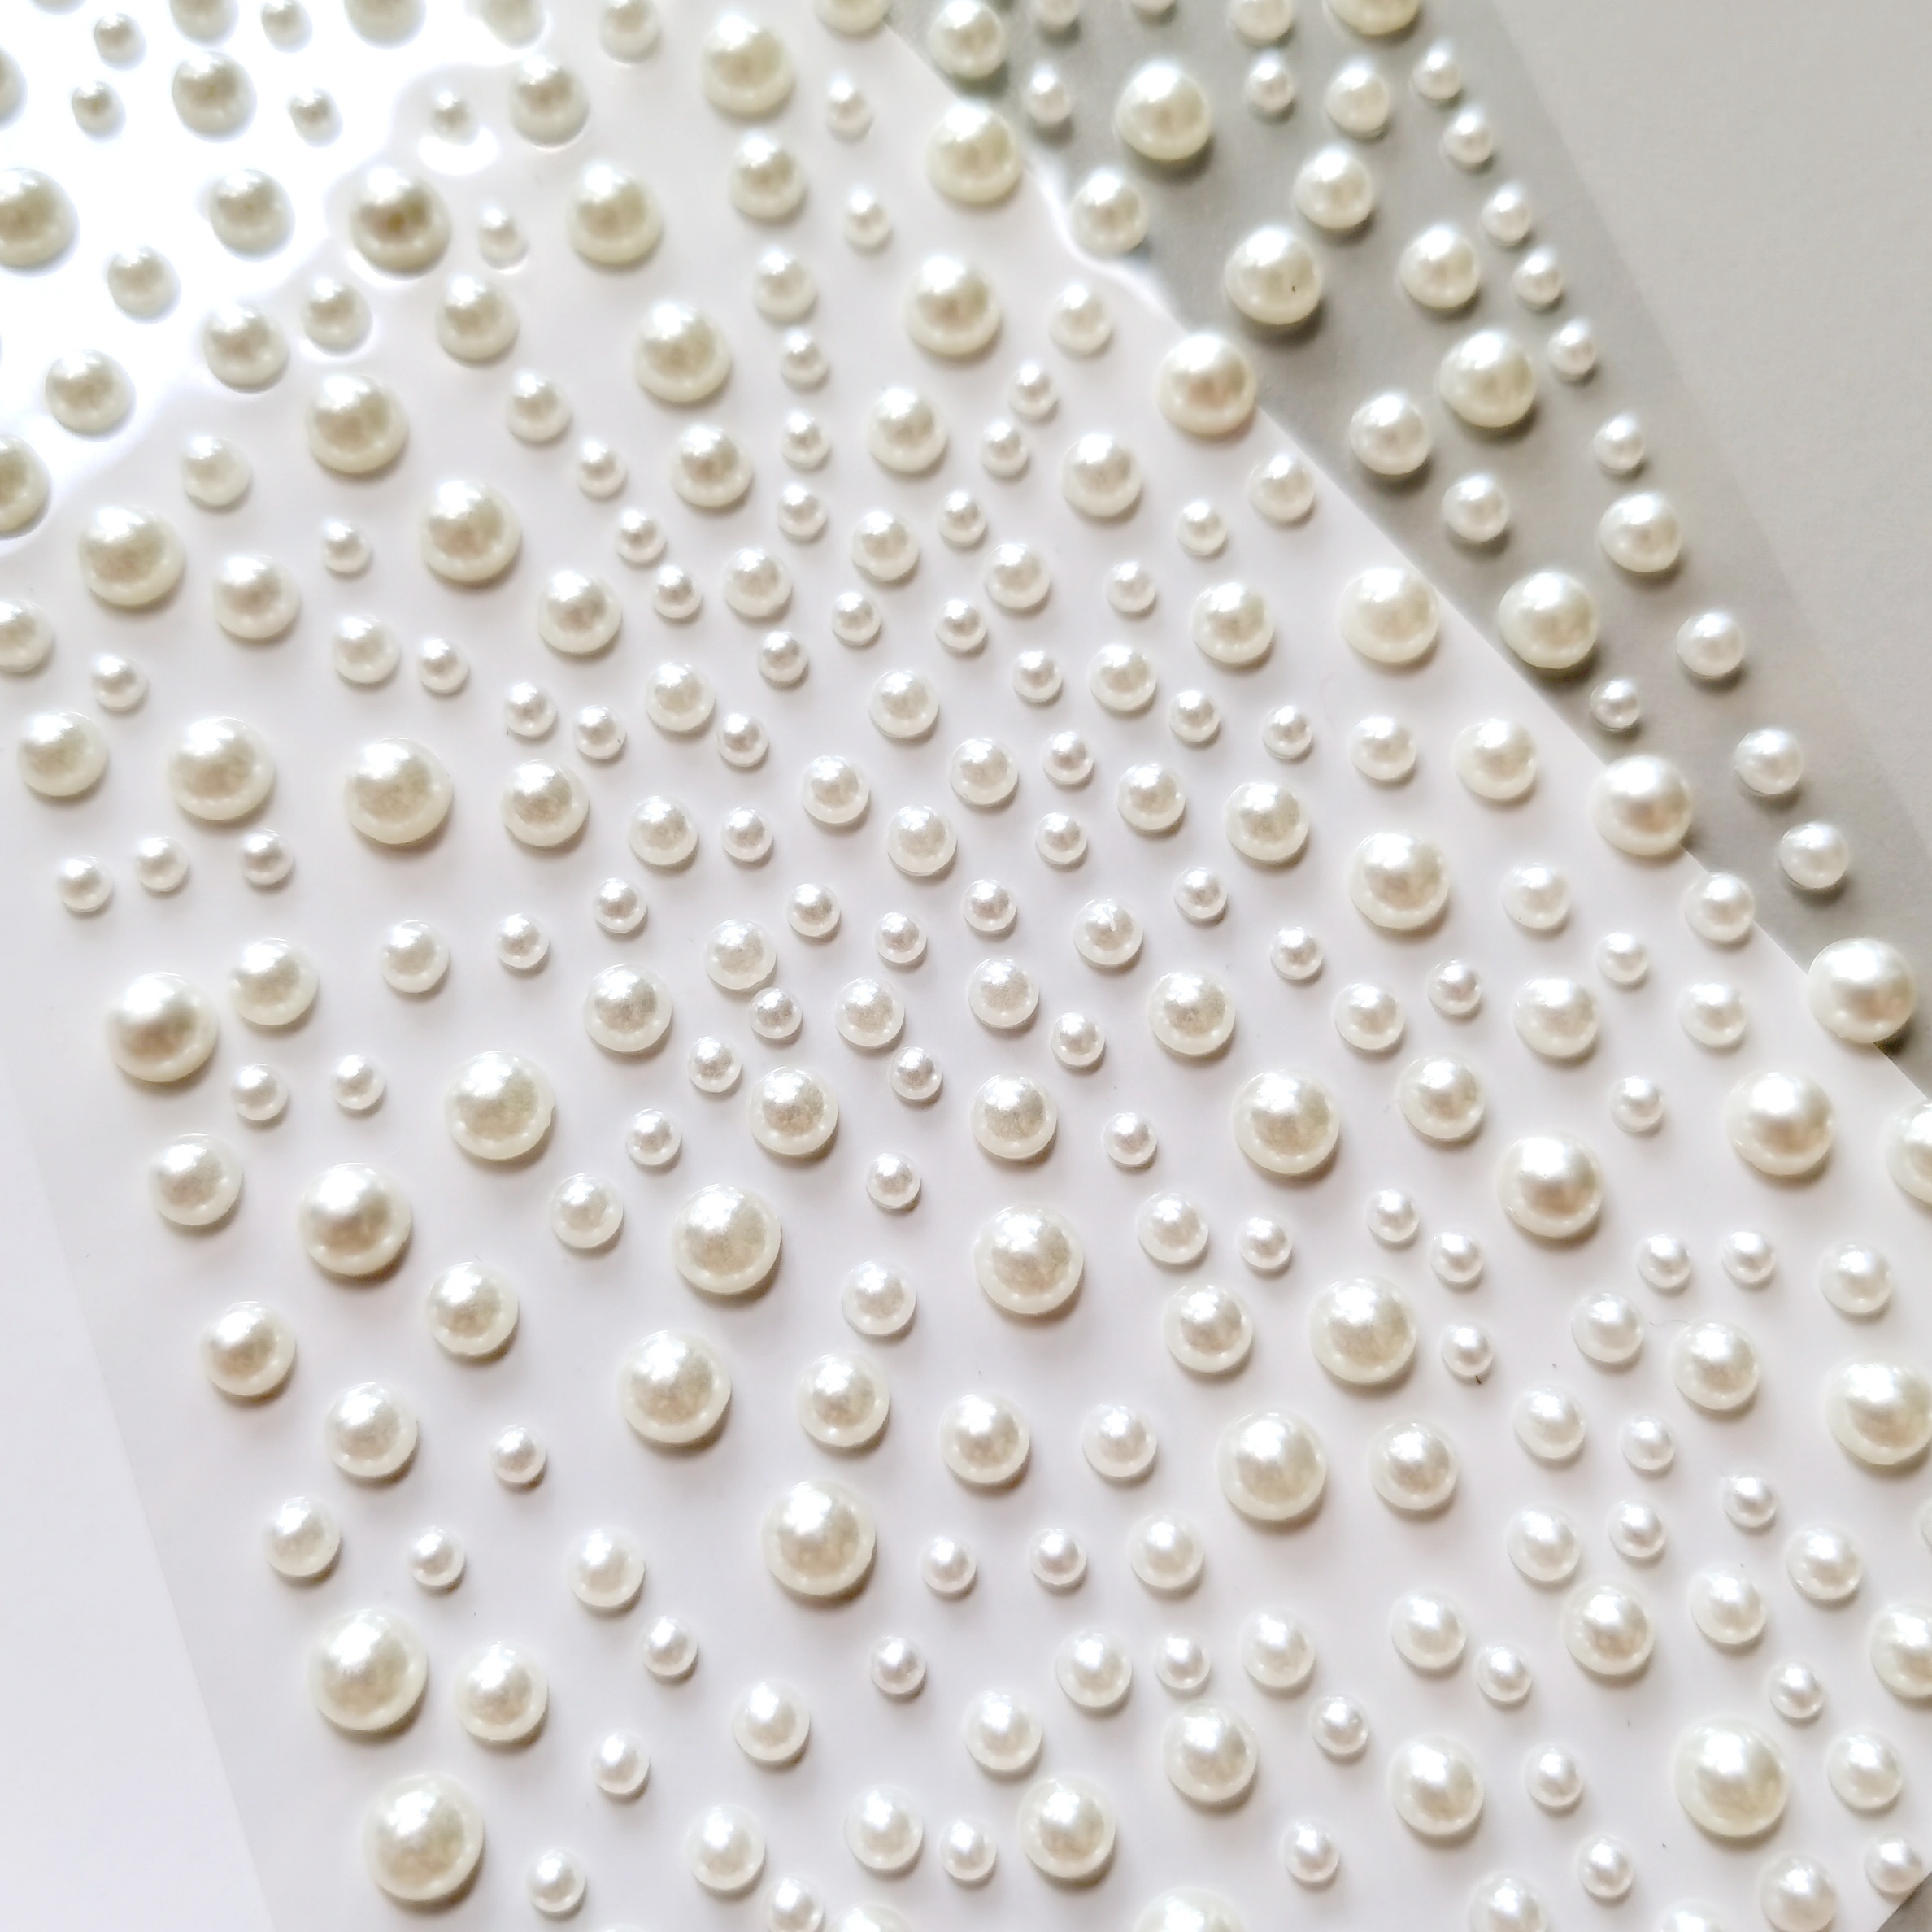 Self Adhesive Pearls Pearl Stickers Stick on Pearls Decorative